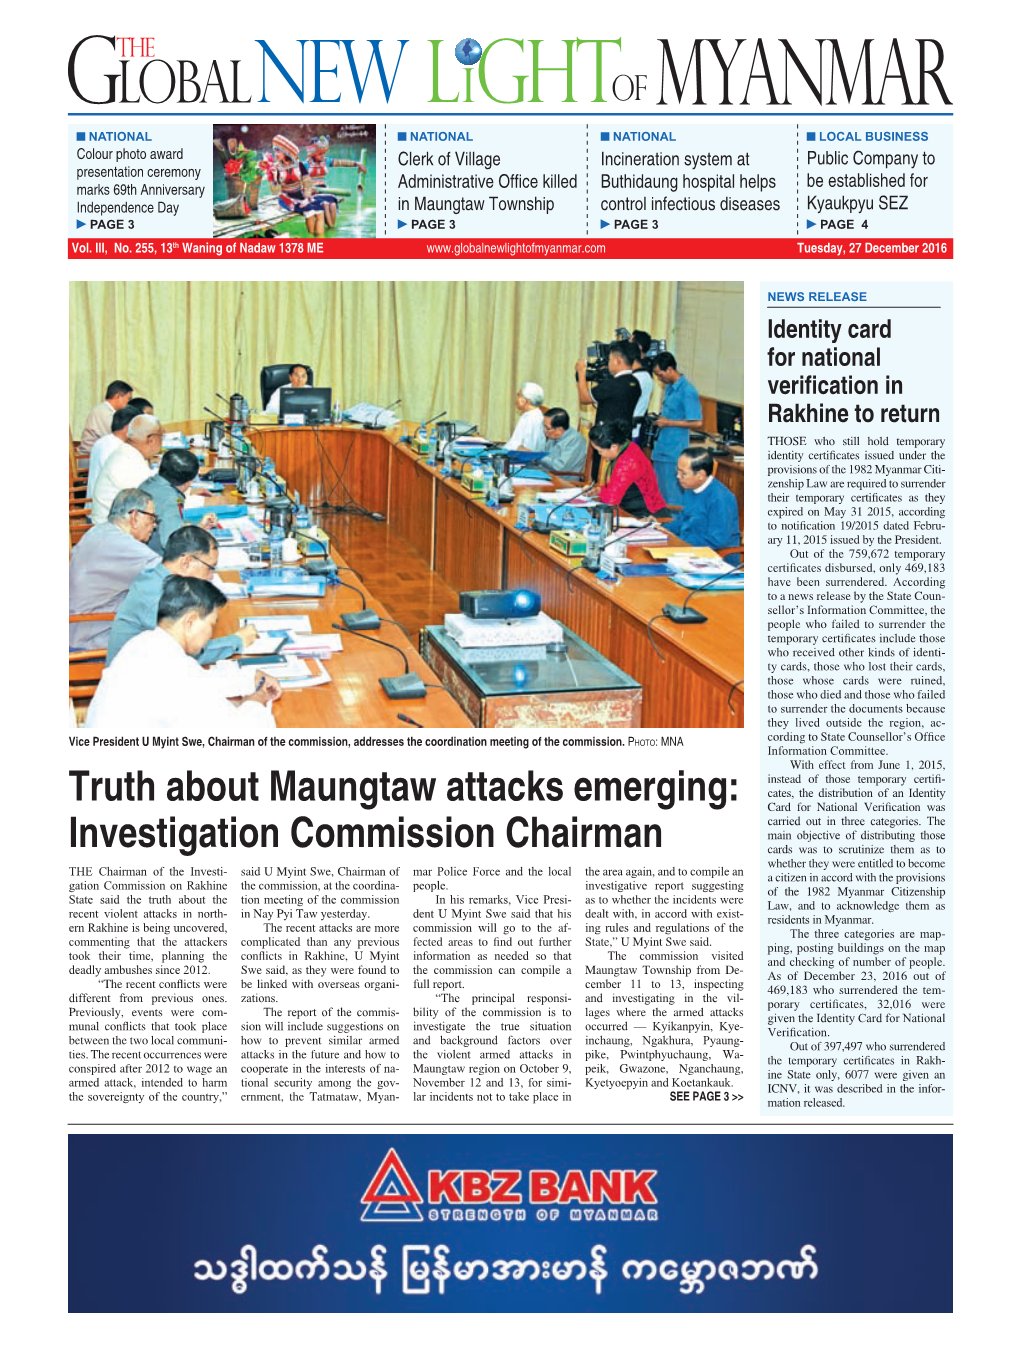 Truth About Maungtaw Attacks Emerging: Investigation